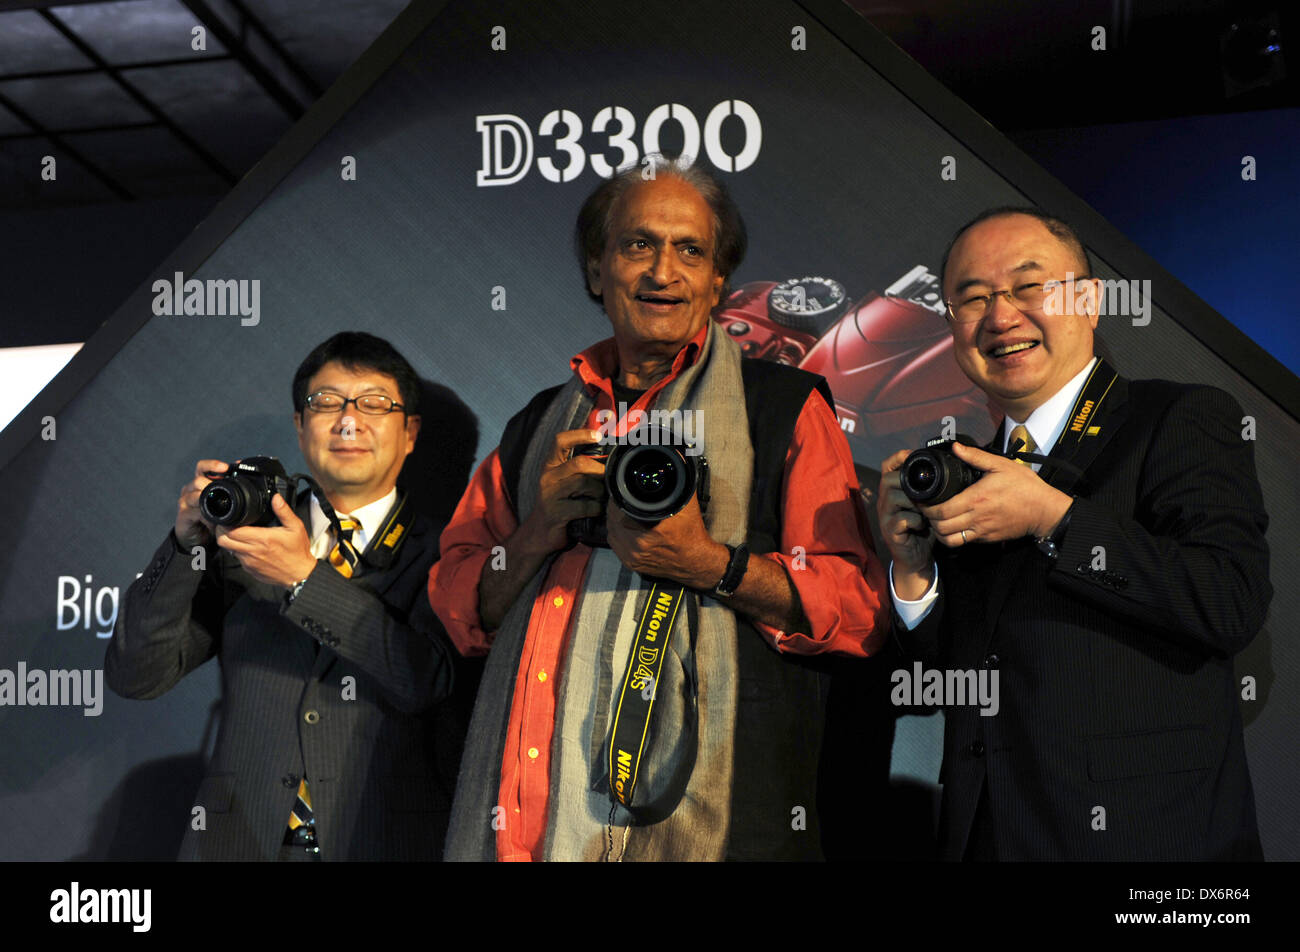 New Delhi, India. 19th Mar, 2014. Photographer Raghu Rai (C) and two senior officers of Nikon Corporation attend the launch ceremony of Nikon D4s and D3300 cameras in New Delhi, India, March 19, 2014. © Partha Sarkar/Xinhua/Alamy Live News Stock Photo